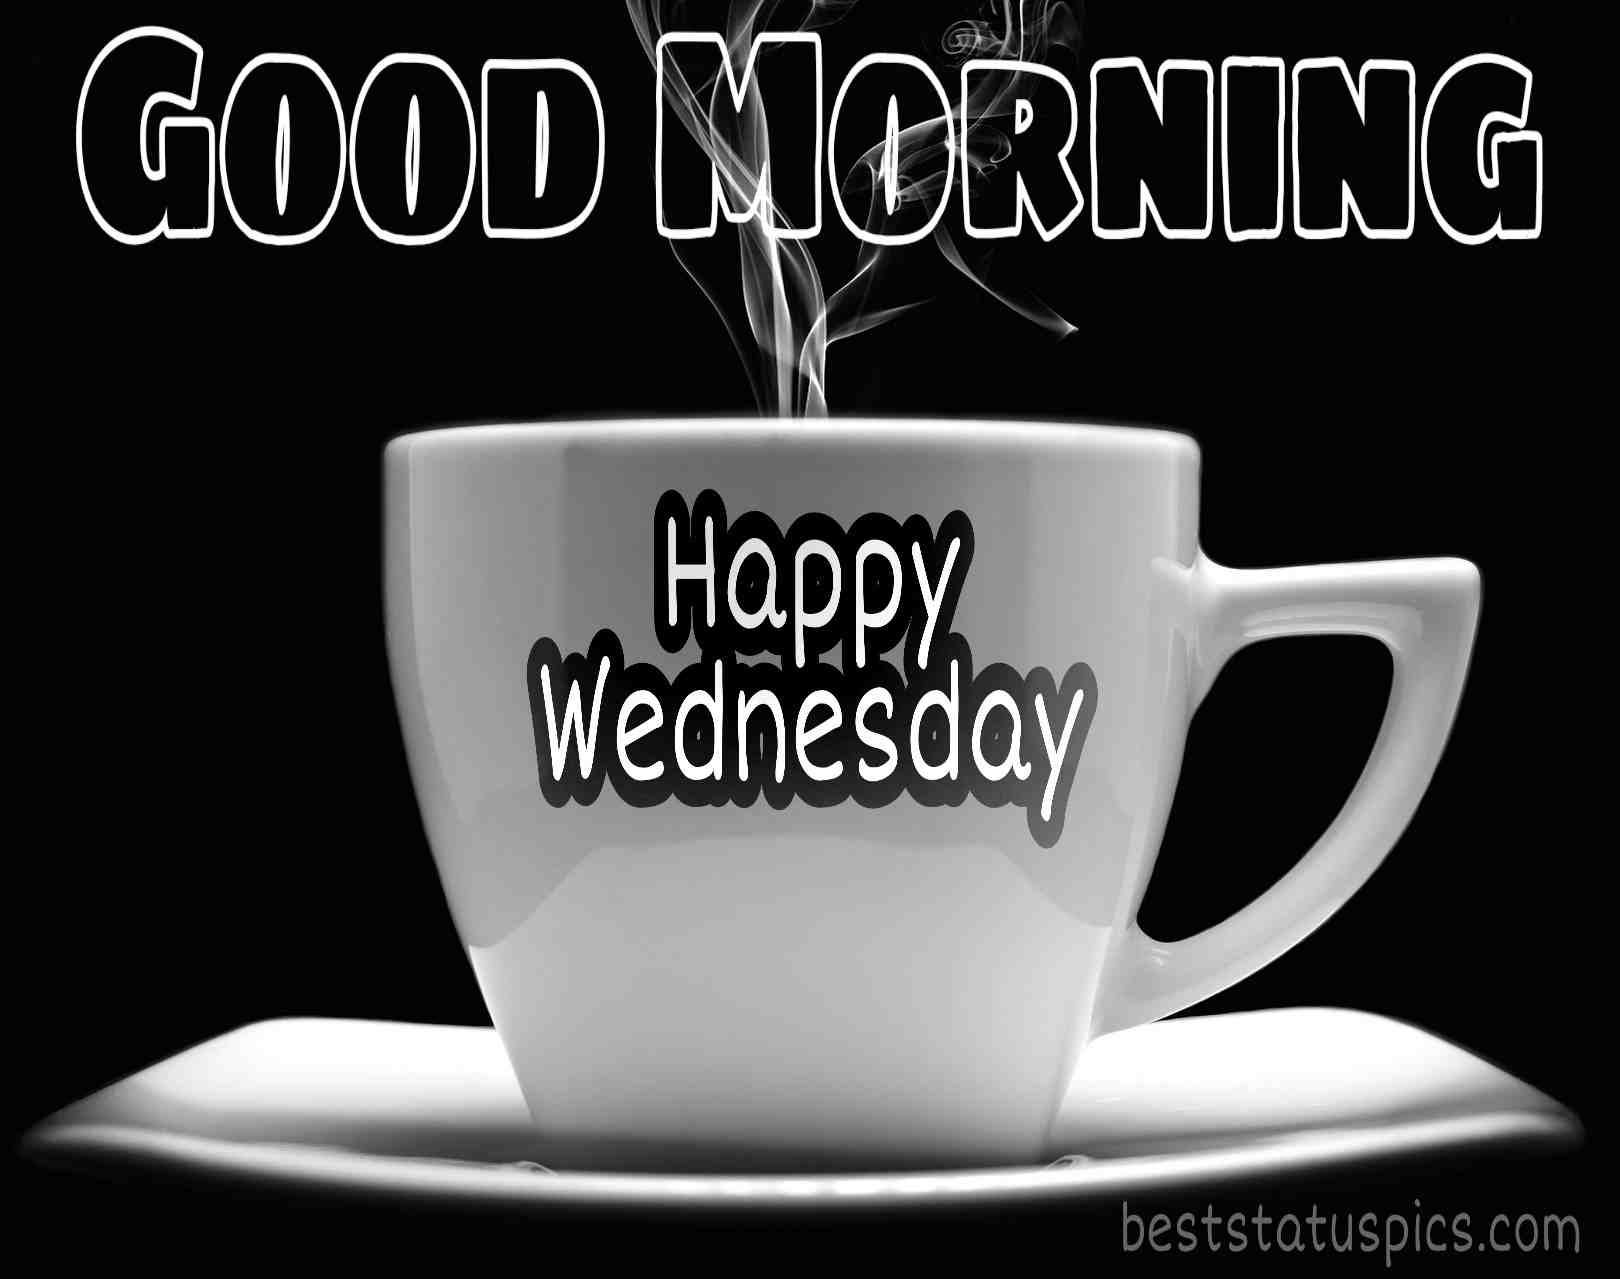 53+ Good Morning Happy Wednesday Wishes Images HD [2022] - Best Status Pics